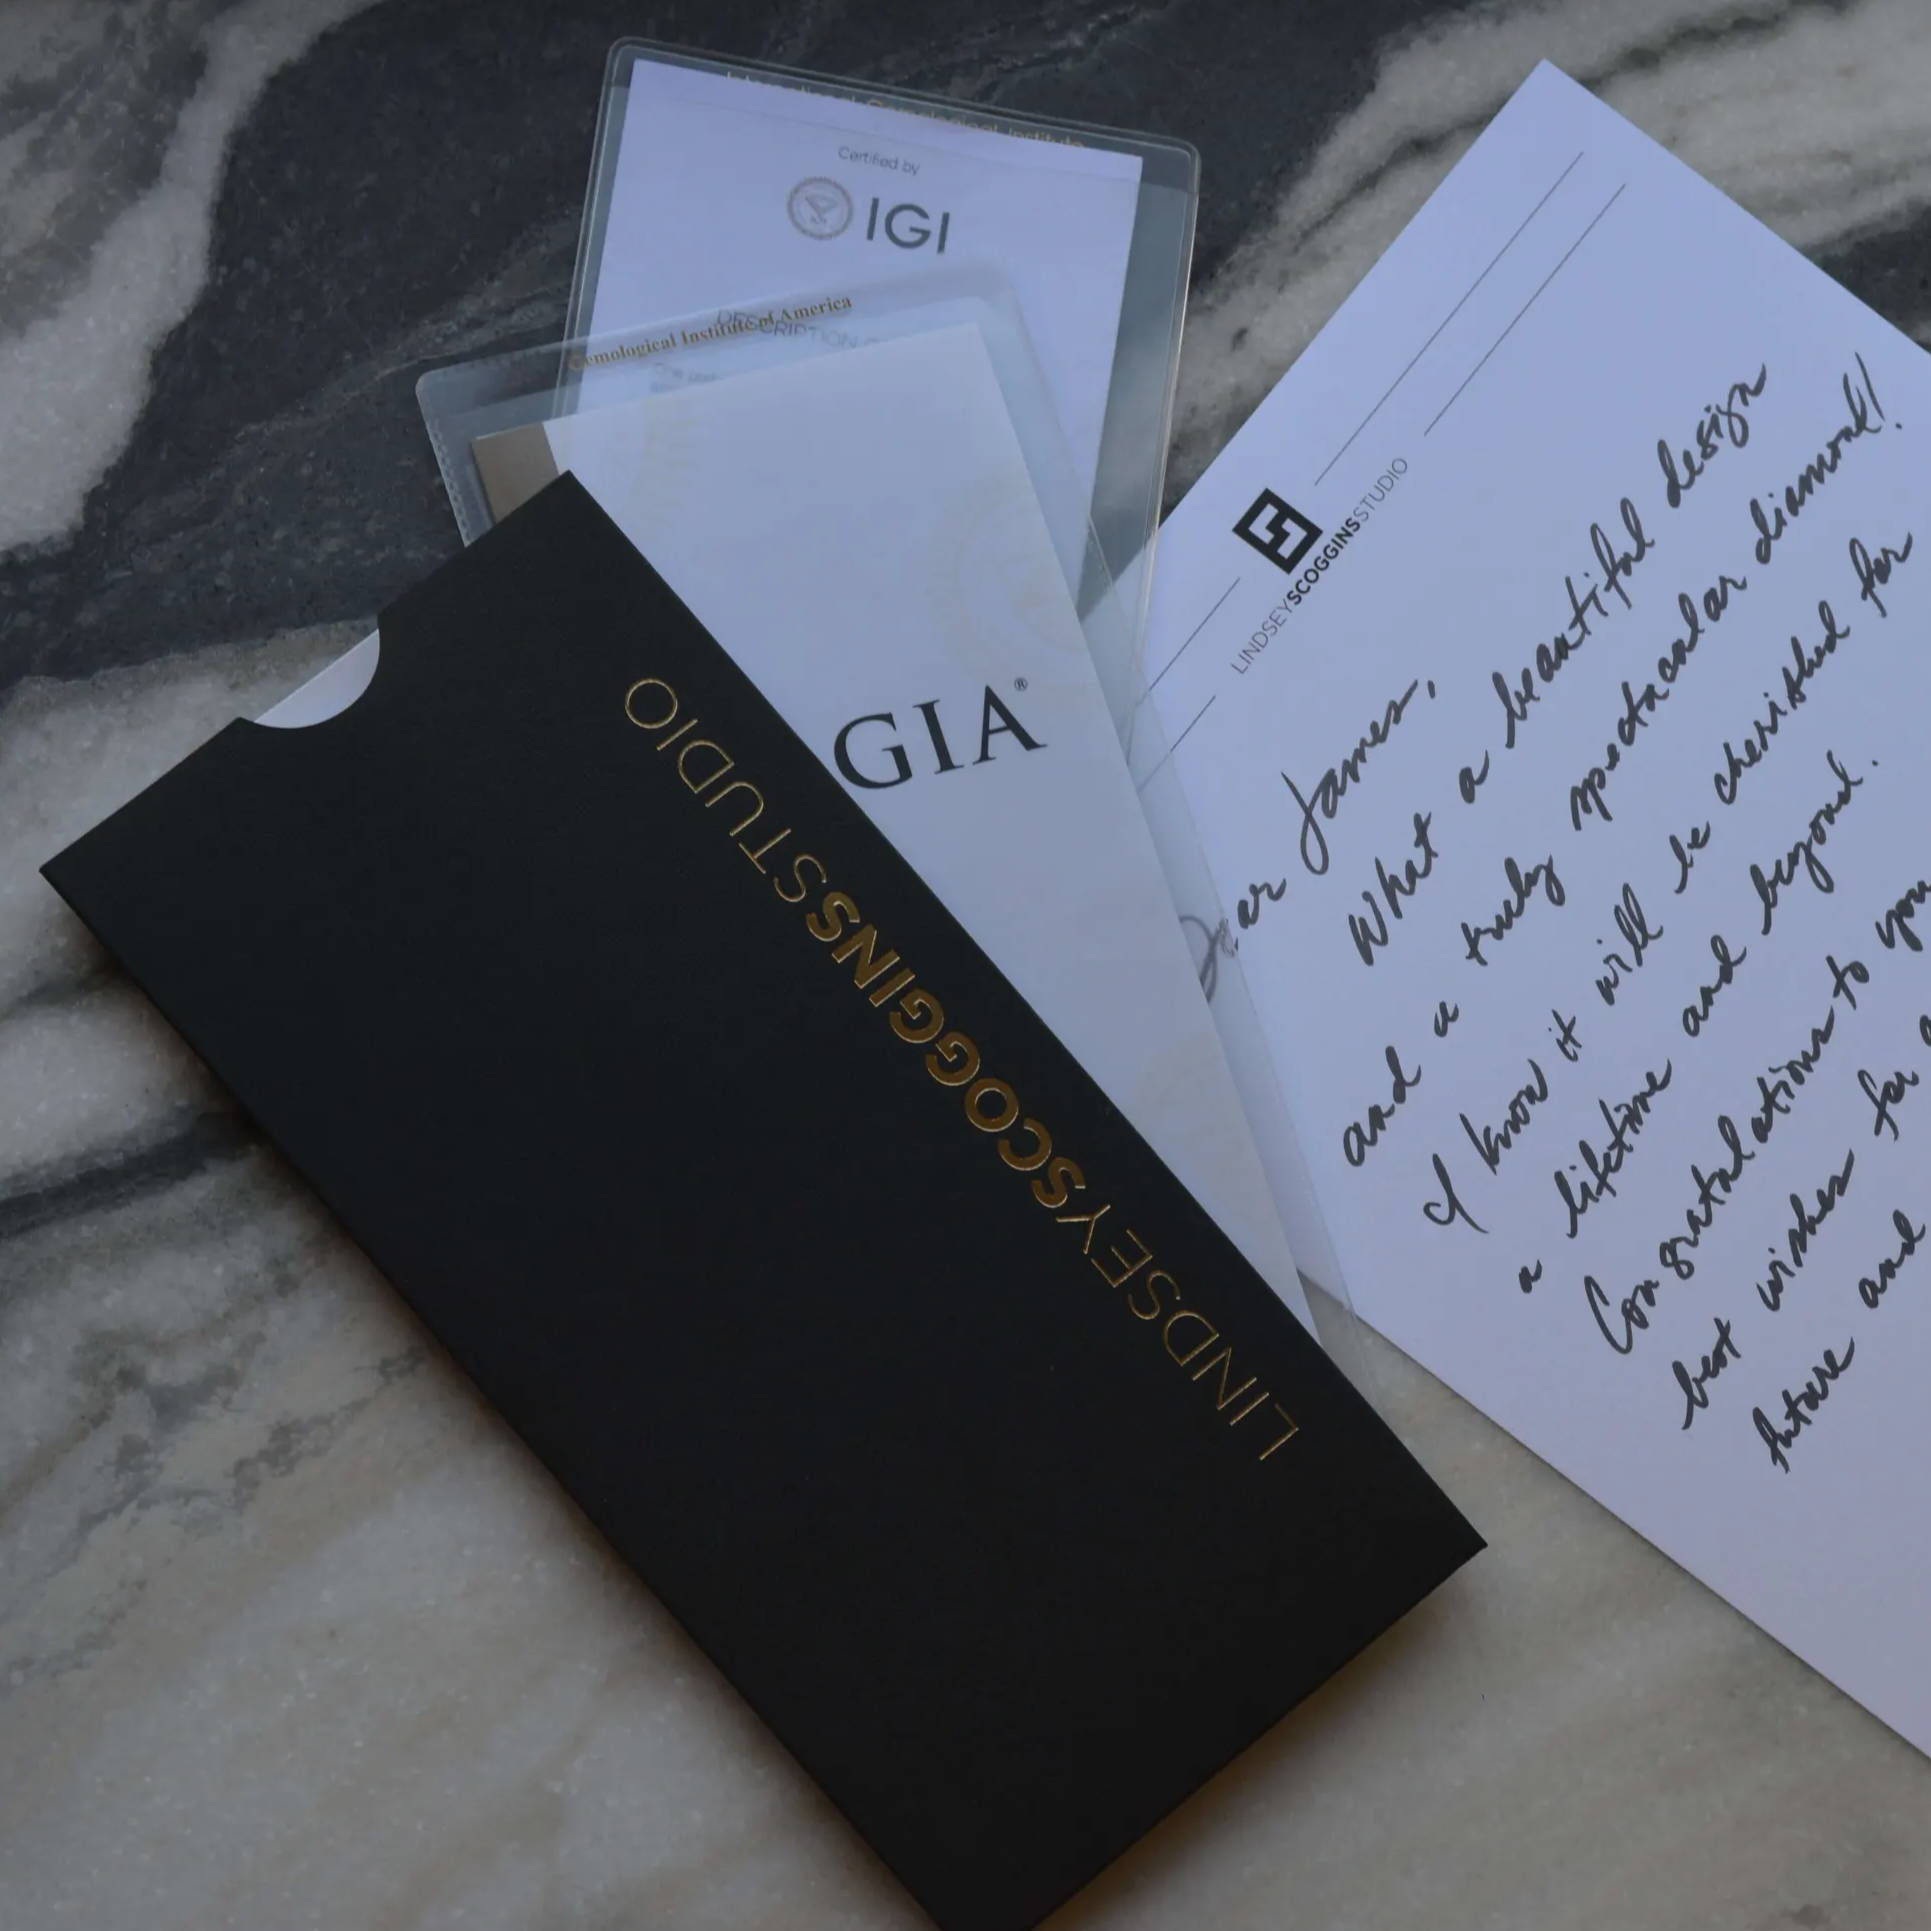 GIA and IGI certifications